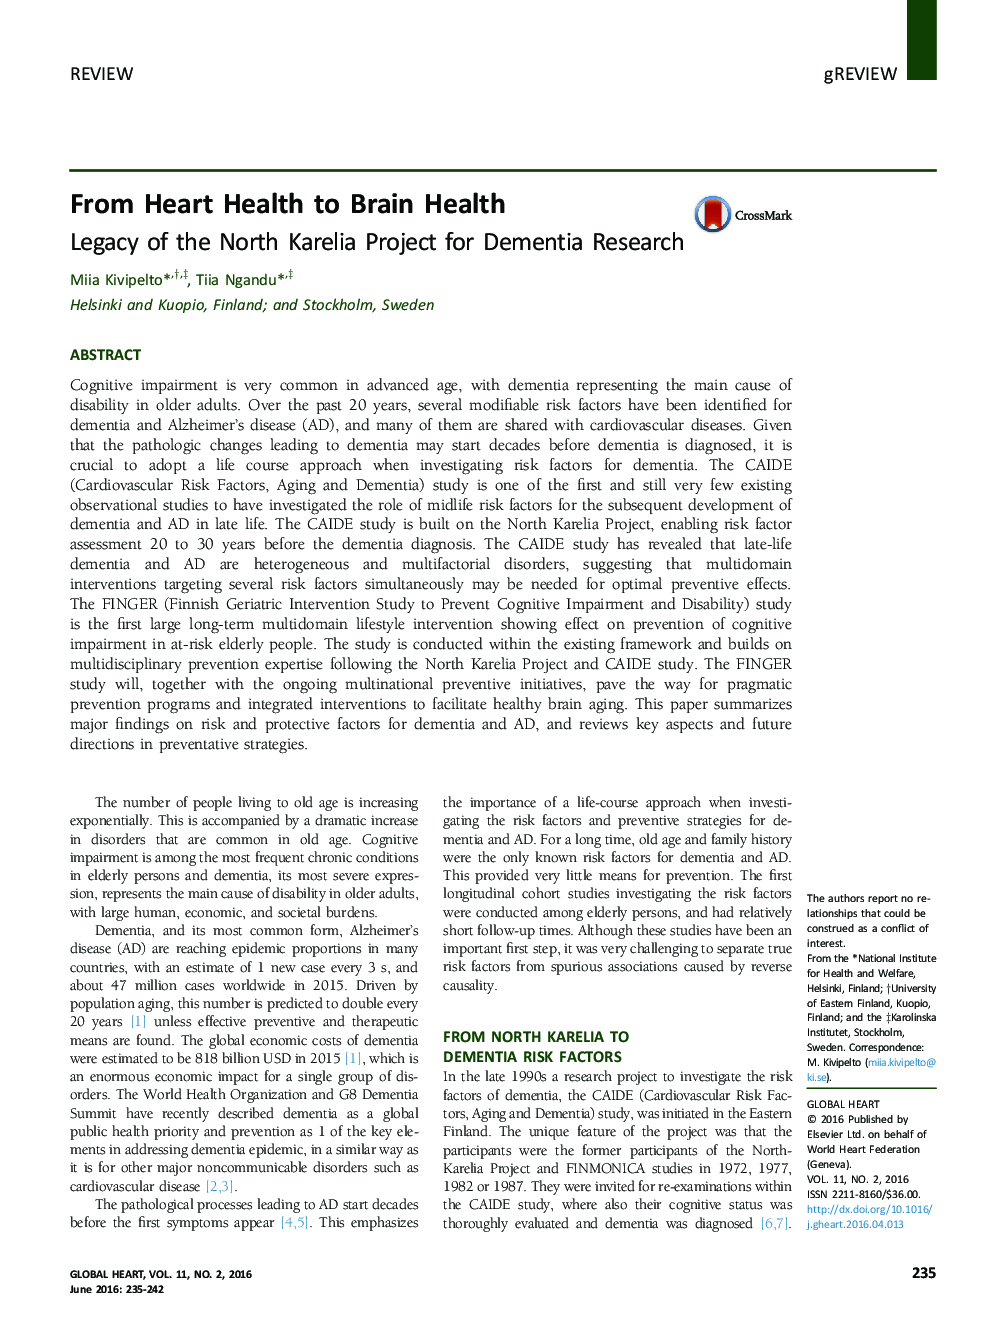 From Heart Health to Brain Health : Legacy of the North Karelia Project for Dementia Research